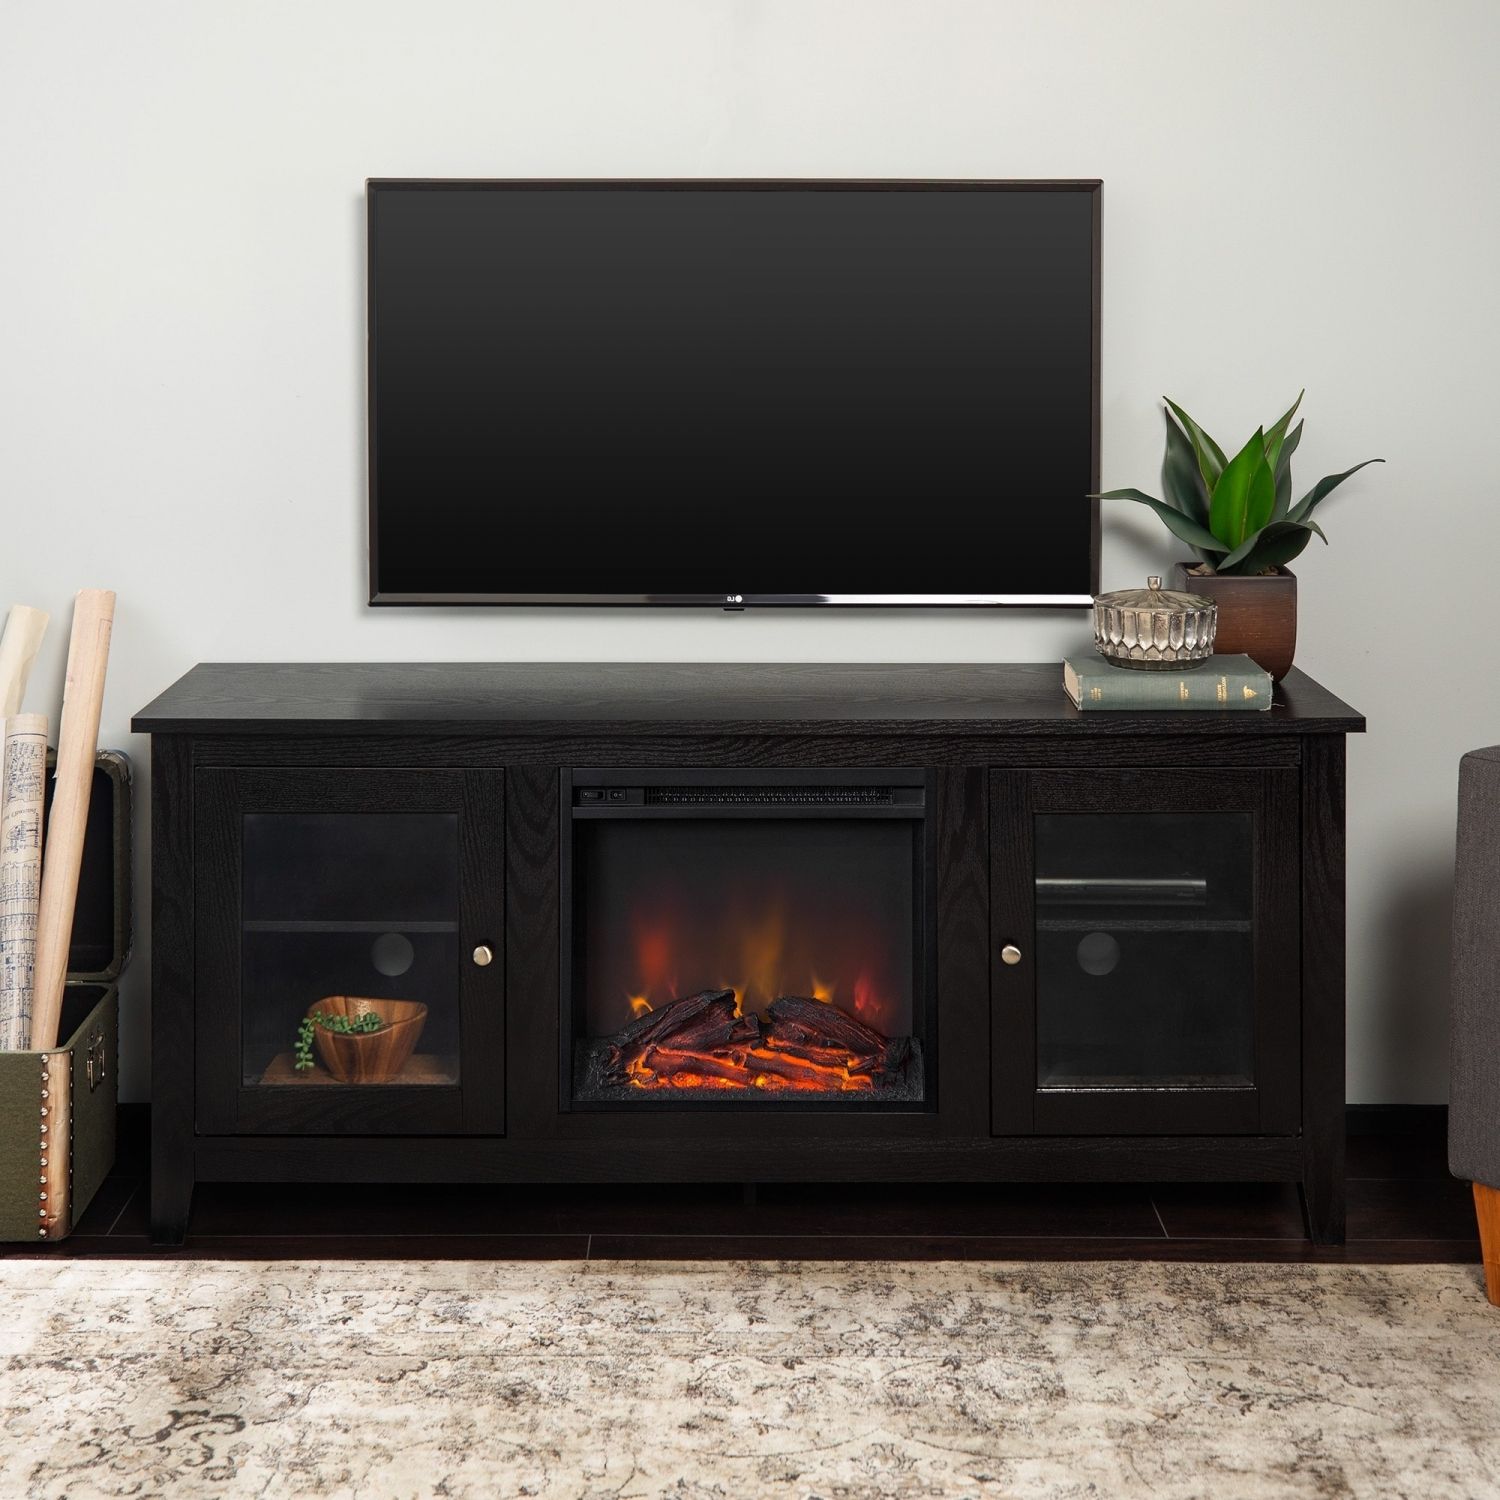 58 In Fireplace Tv Stand Console – Black | Ebay With Regard To Fireplace Media Console Tv Stands With Weathered Finish (View 3 of 20)